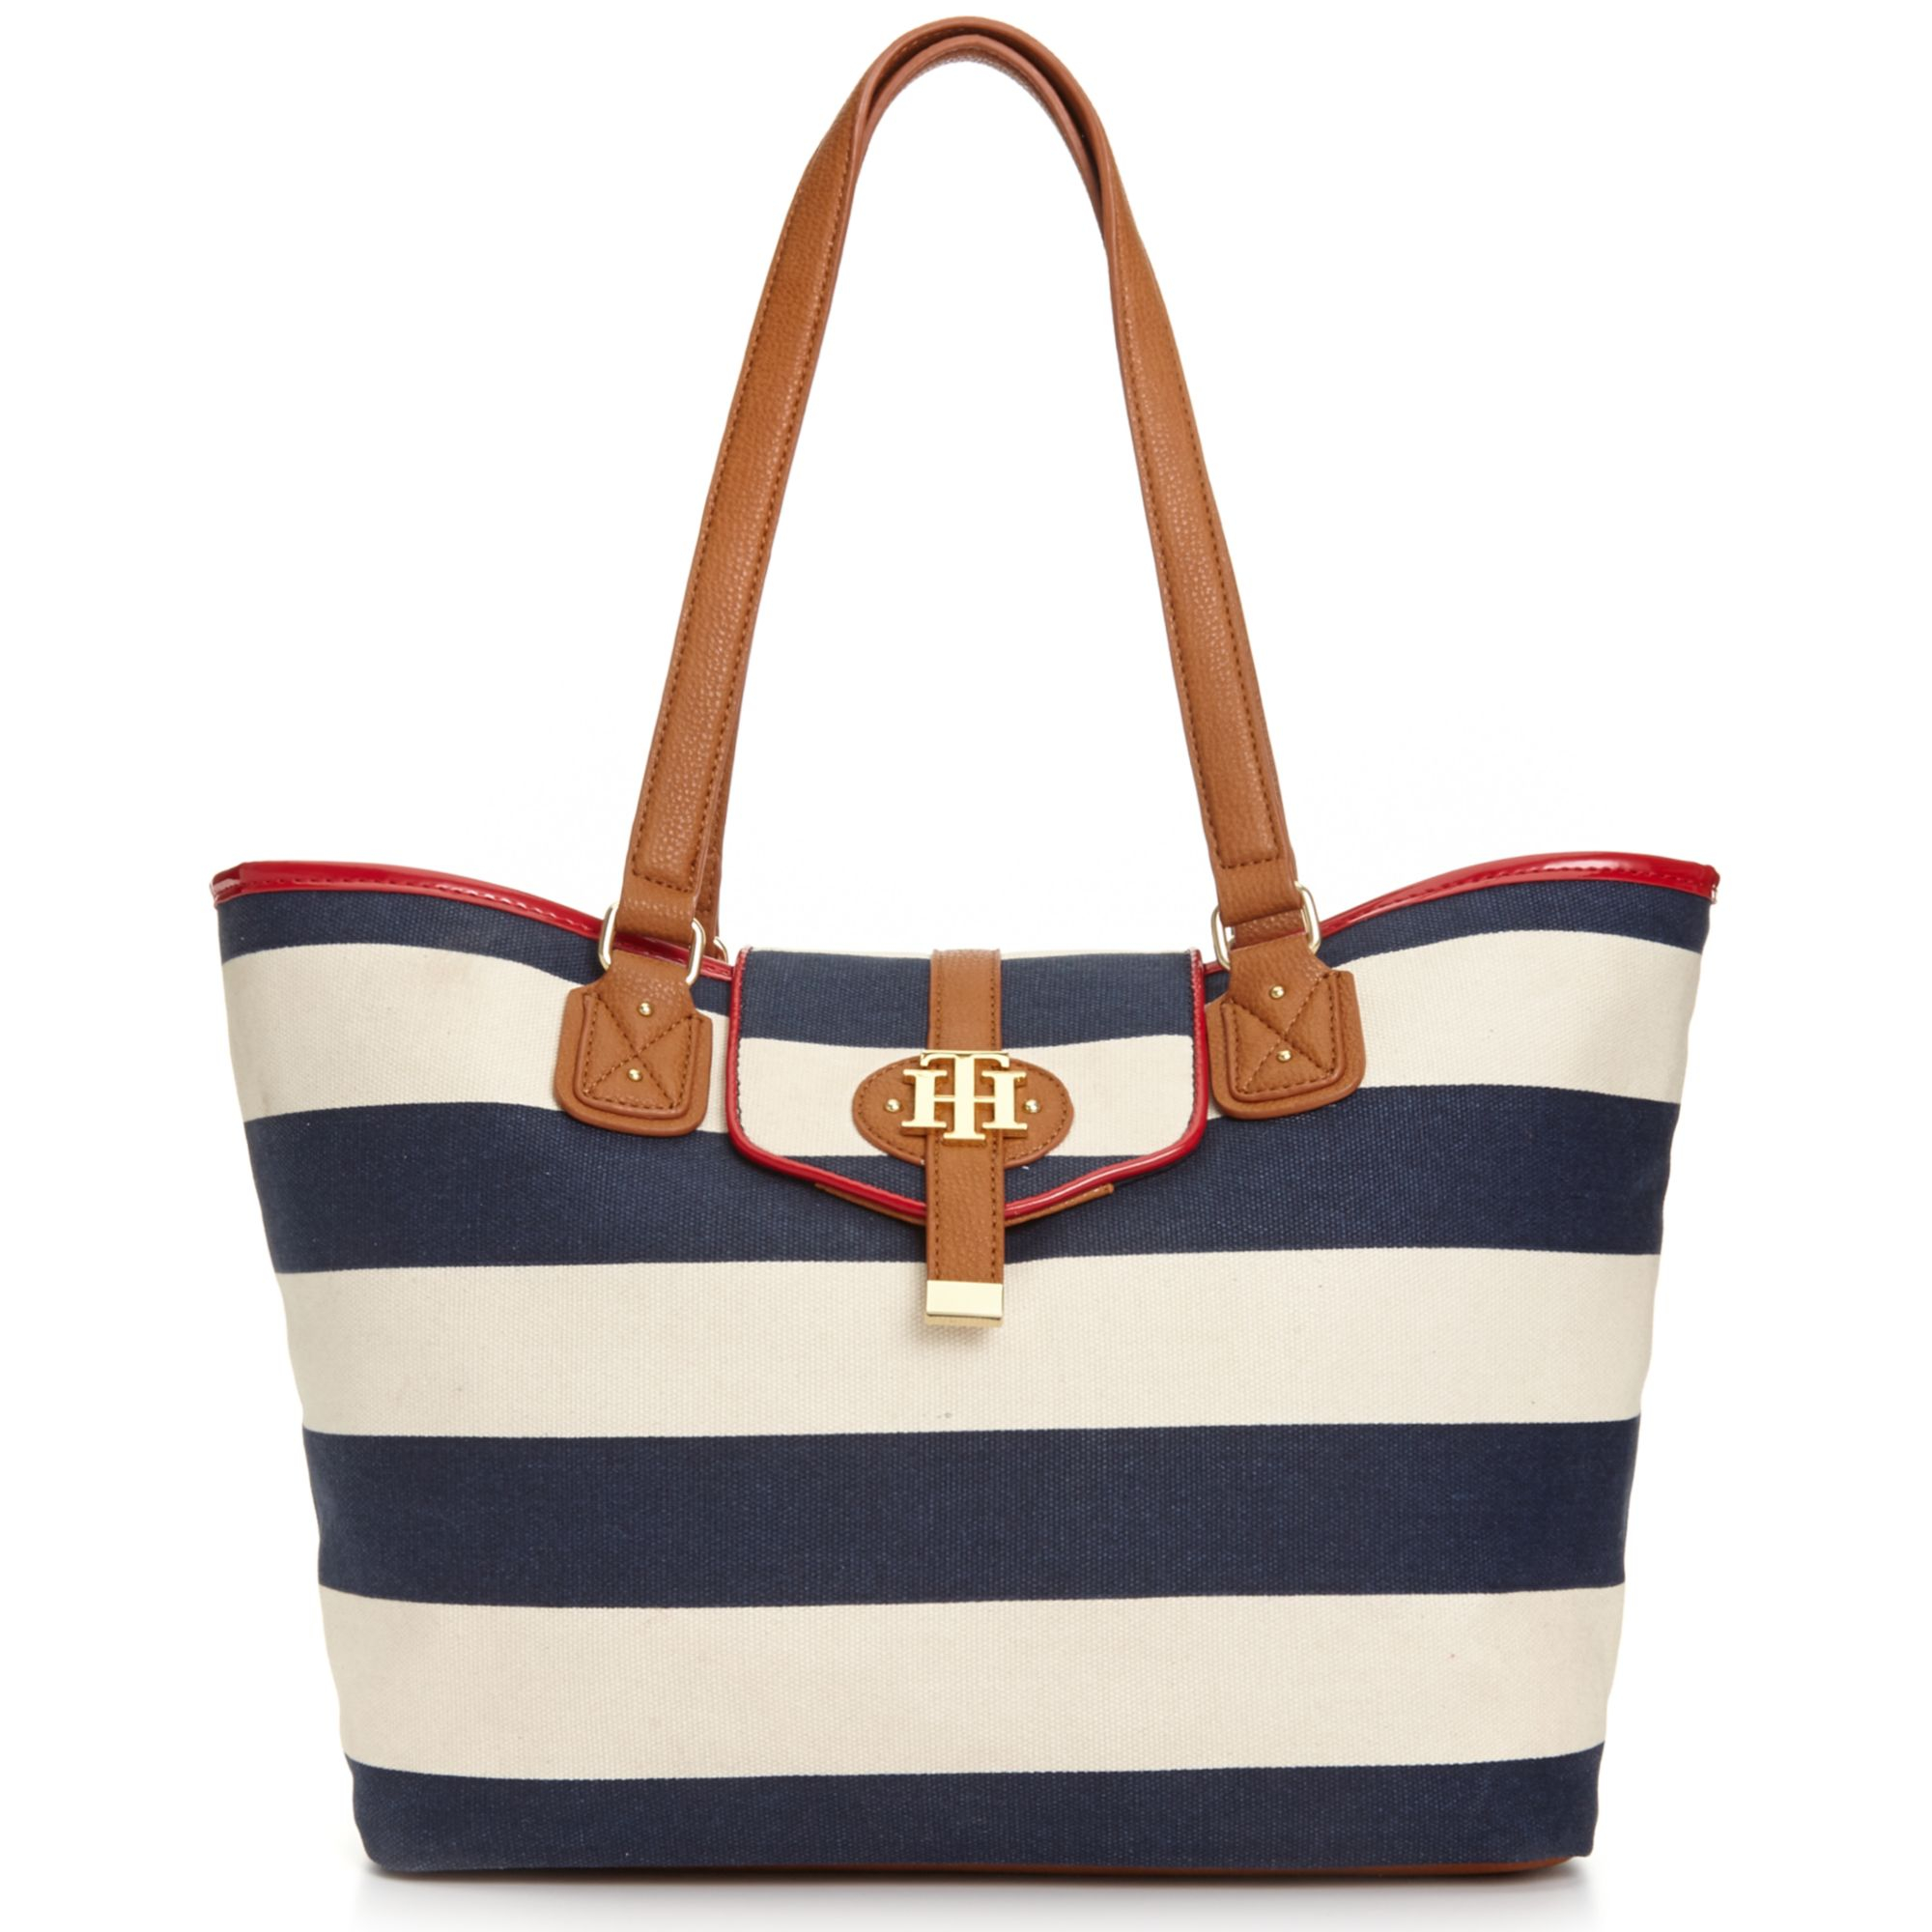 Lyst - Tommy Hilfiger Th Keepsake Tote in Natural